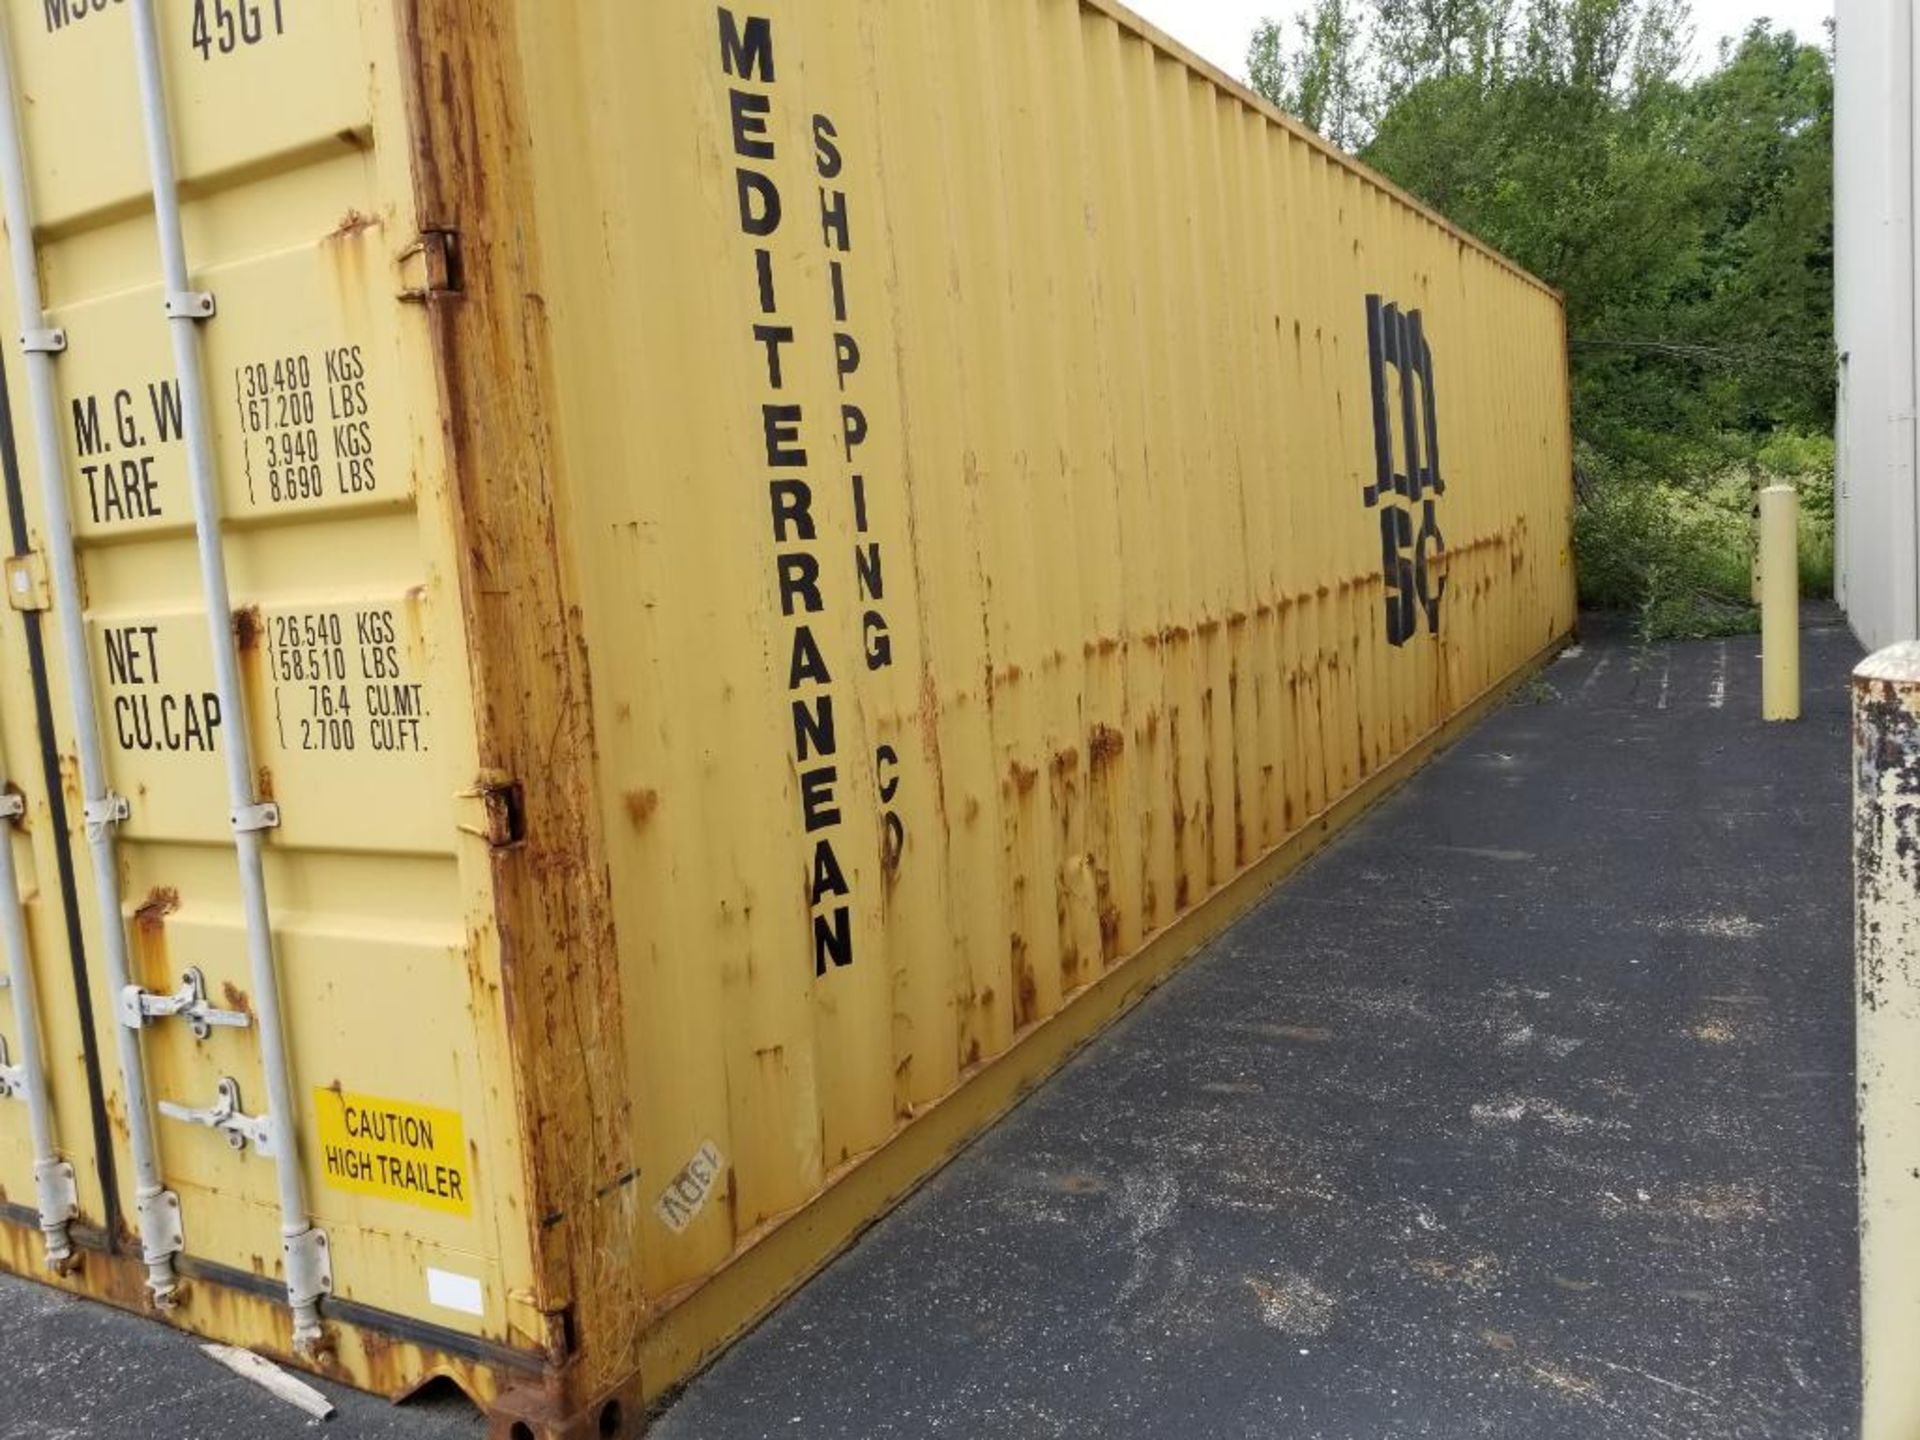 2006 Storage container. 40ft length. 9ft 6in tall. Type NL40H-181A. Max gross weight 67,200lbs. - Image 8 of 9